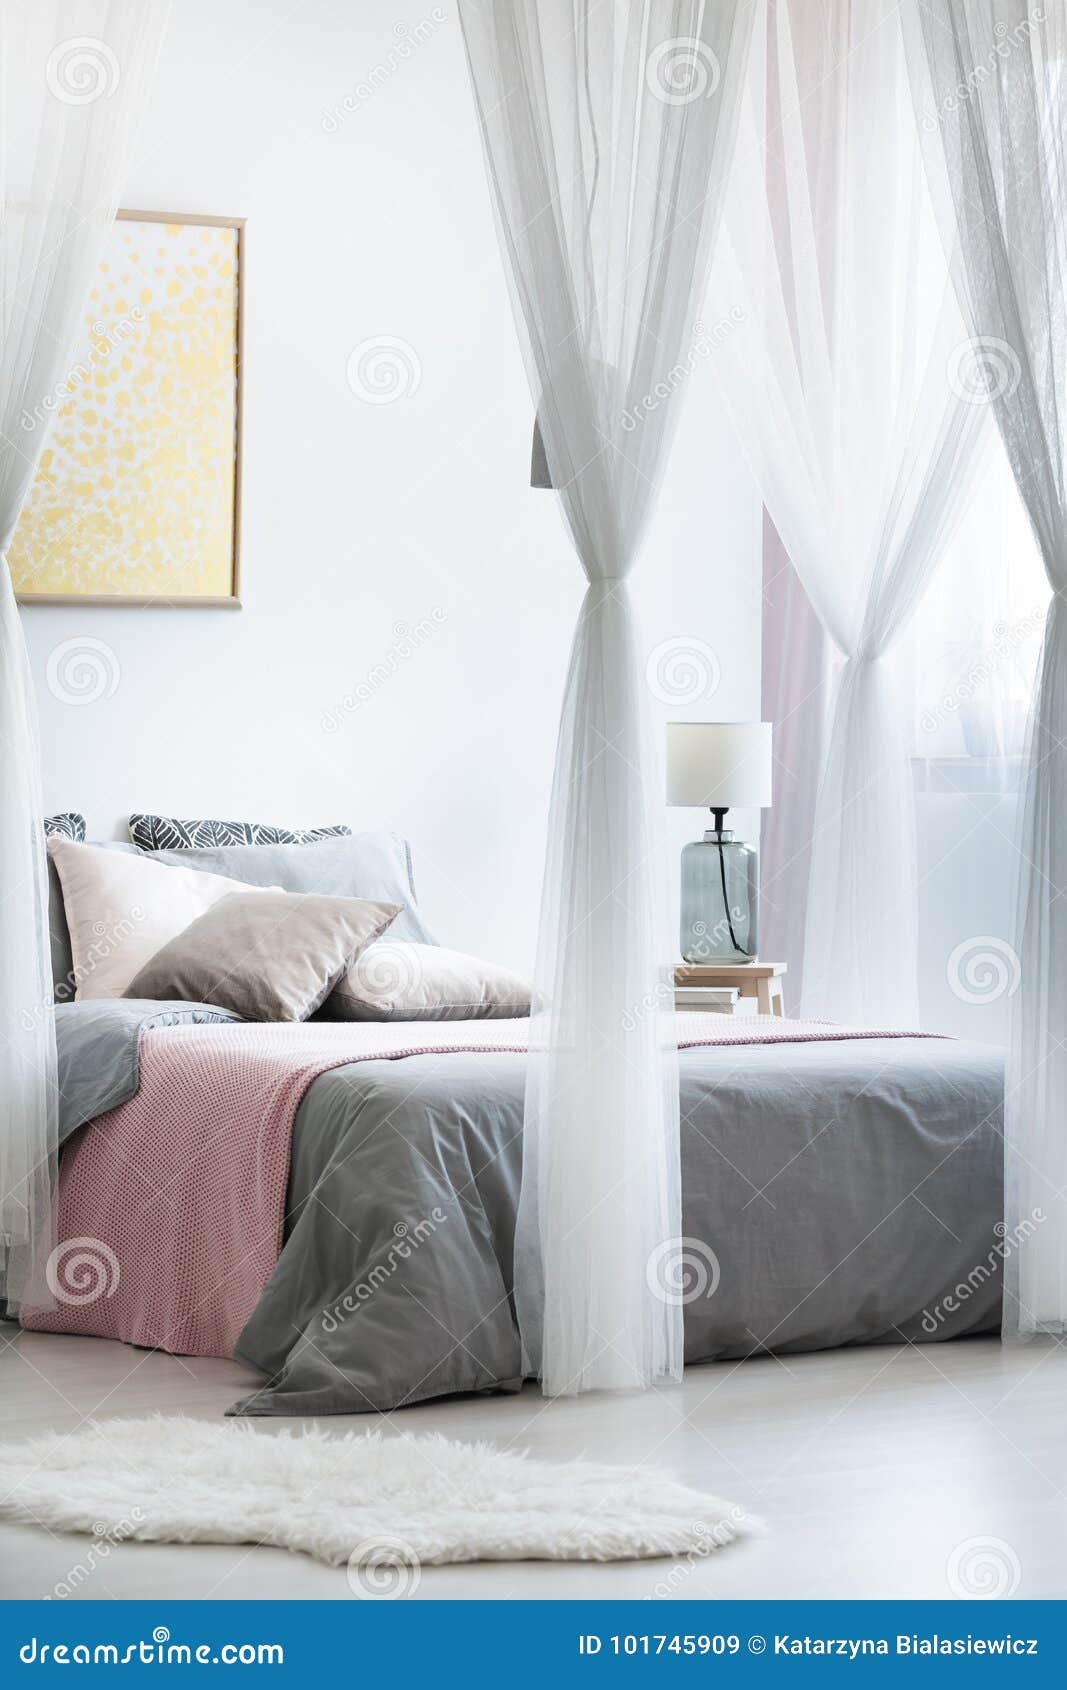 Gold Painting In Canopy Bedroom Stock Image Image Of Bright